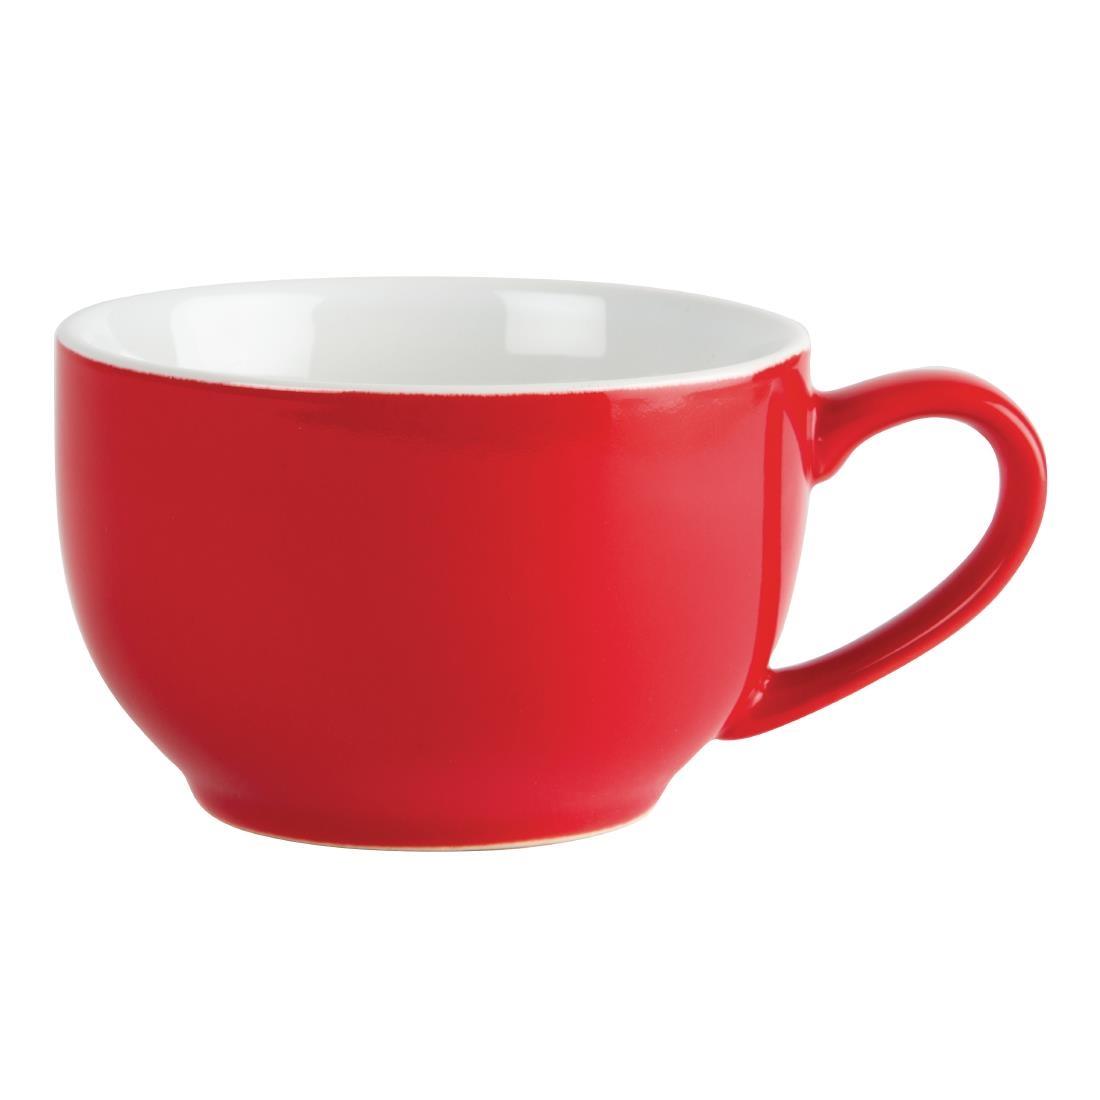 Olympia Cafe Coffee Cups Red 228ml (Pack of 12) - GK073  - 1